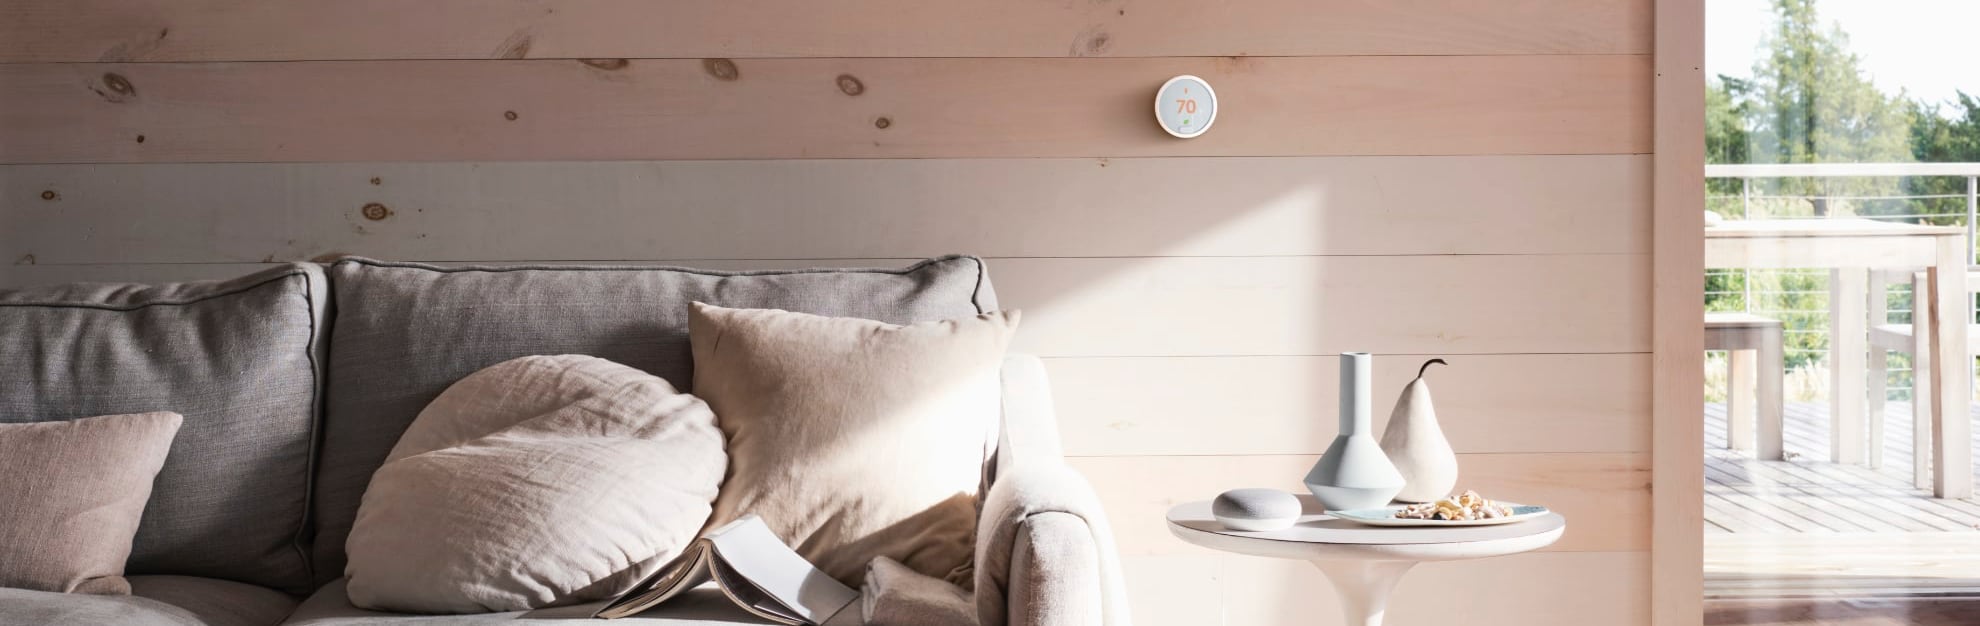 Vivint Home Automation in South Bend